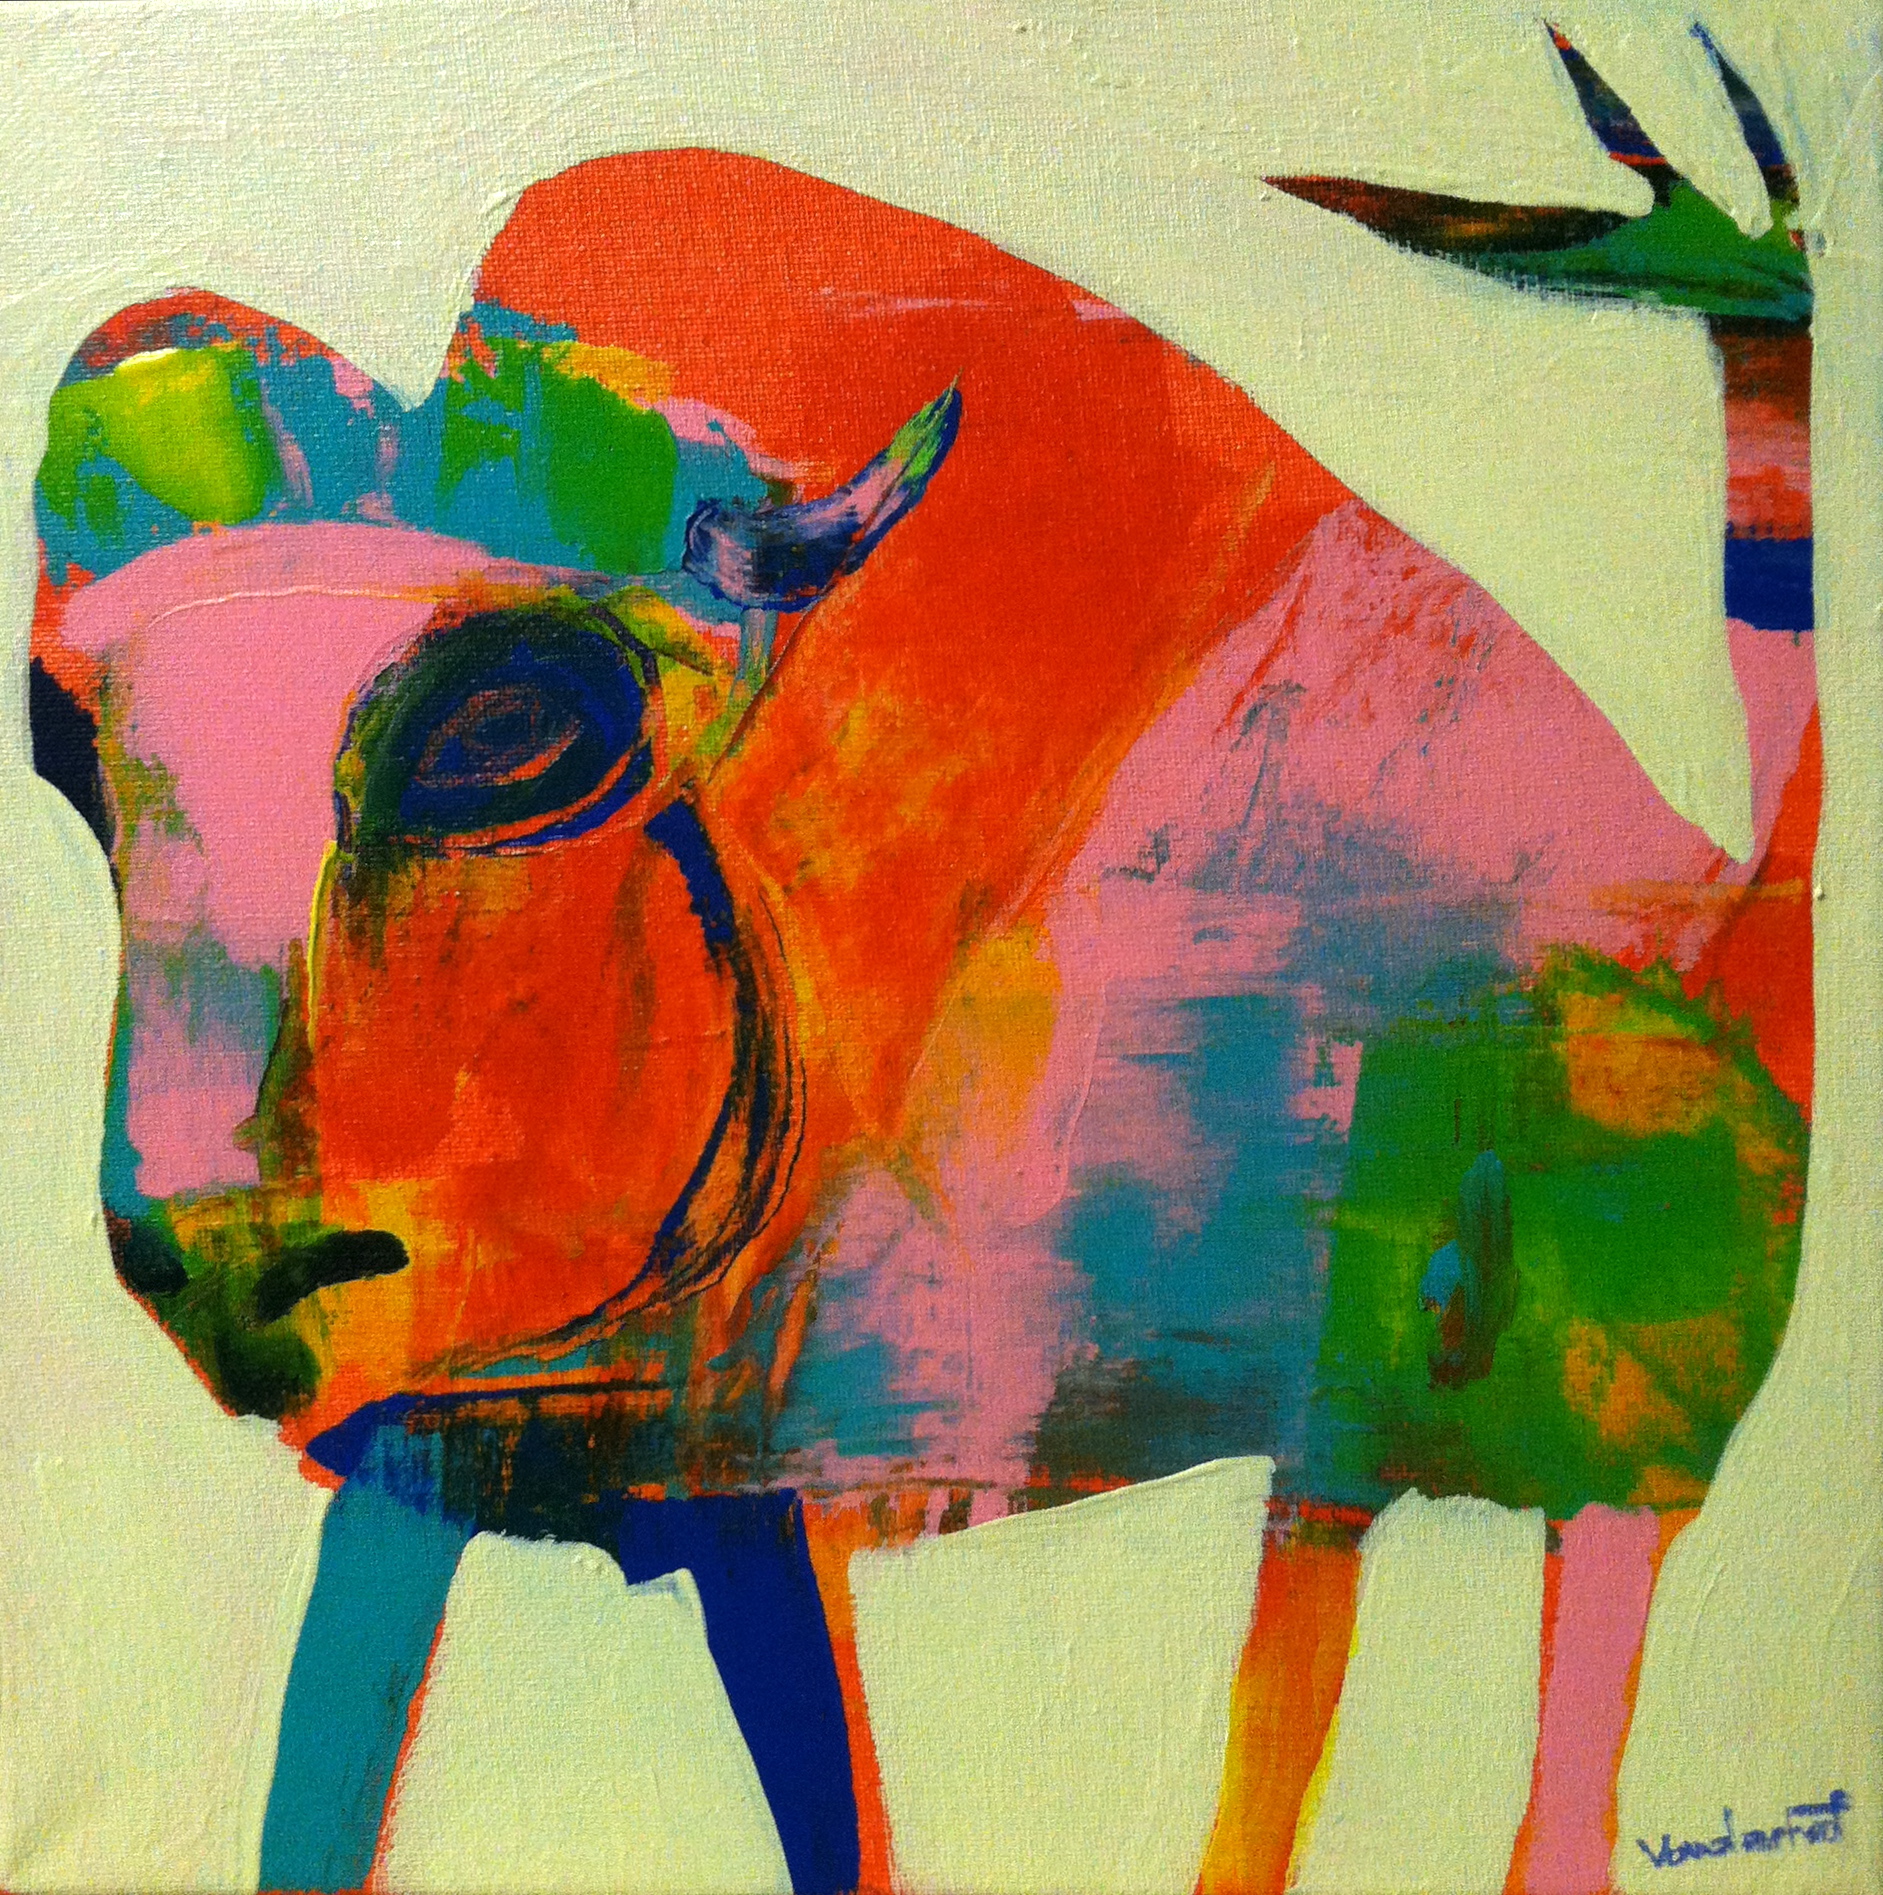  Bison with tail, acrylic on canvas, 12x12 inches, 2015 